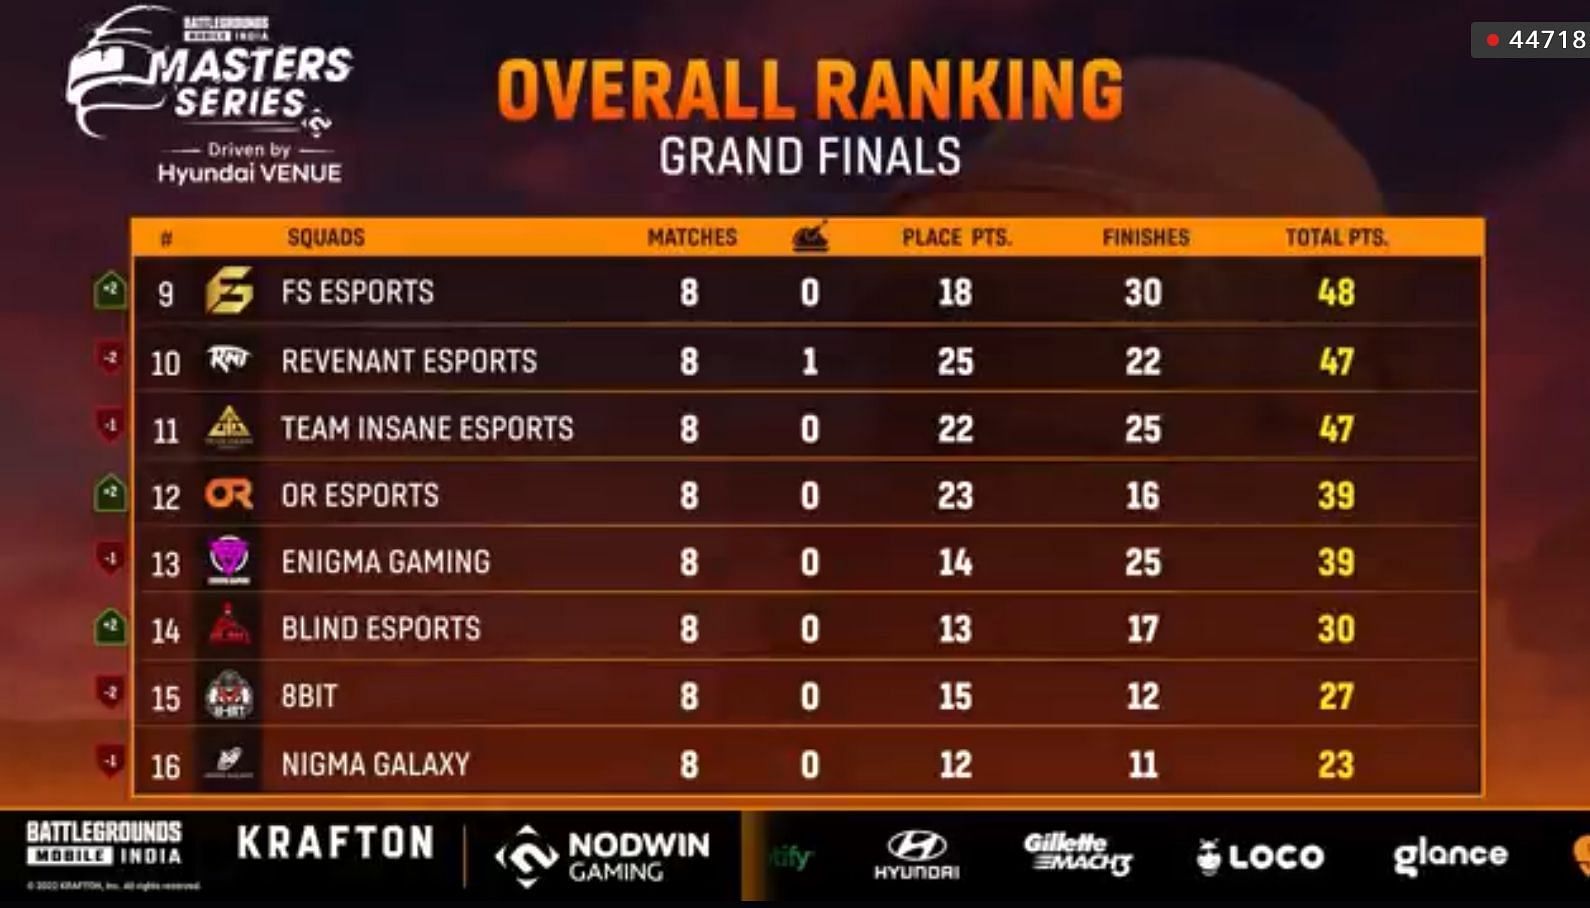 Overall ranking of BGMI Masters Series Grand Finals after day 2 (Image via Loco)